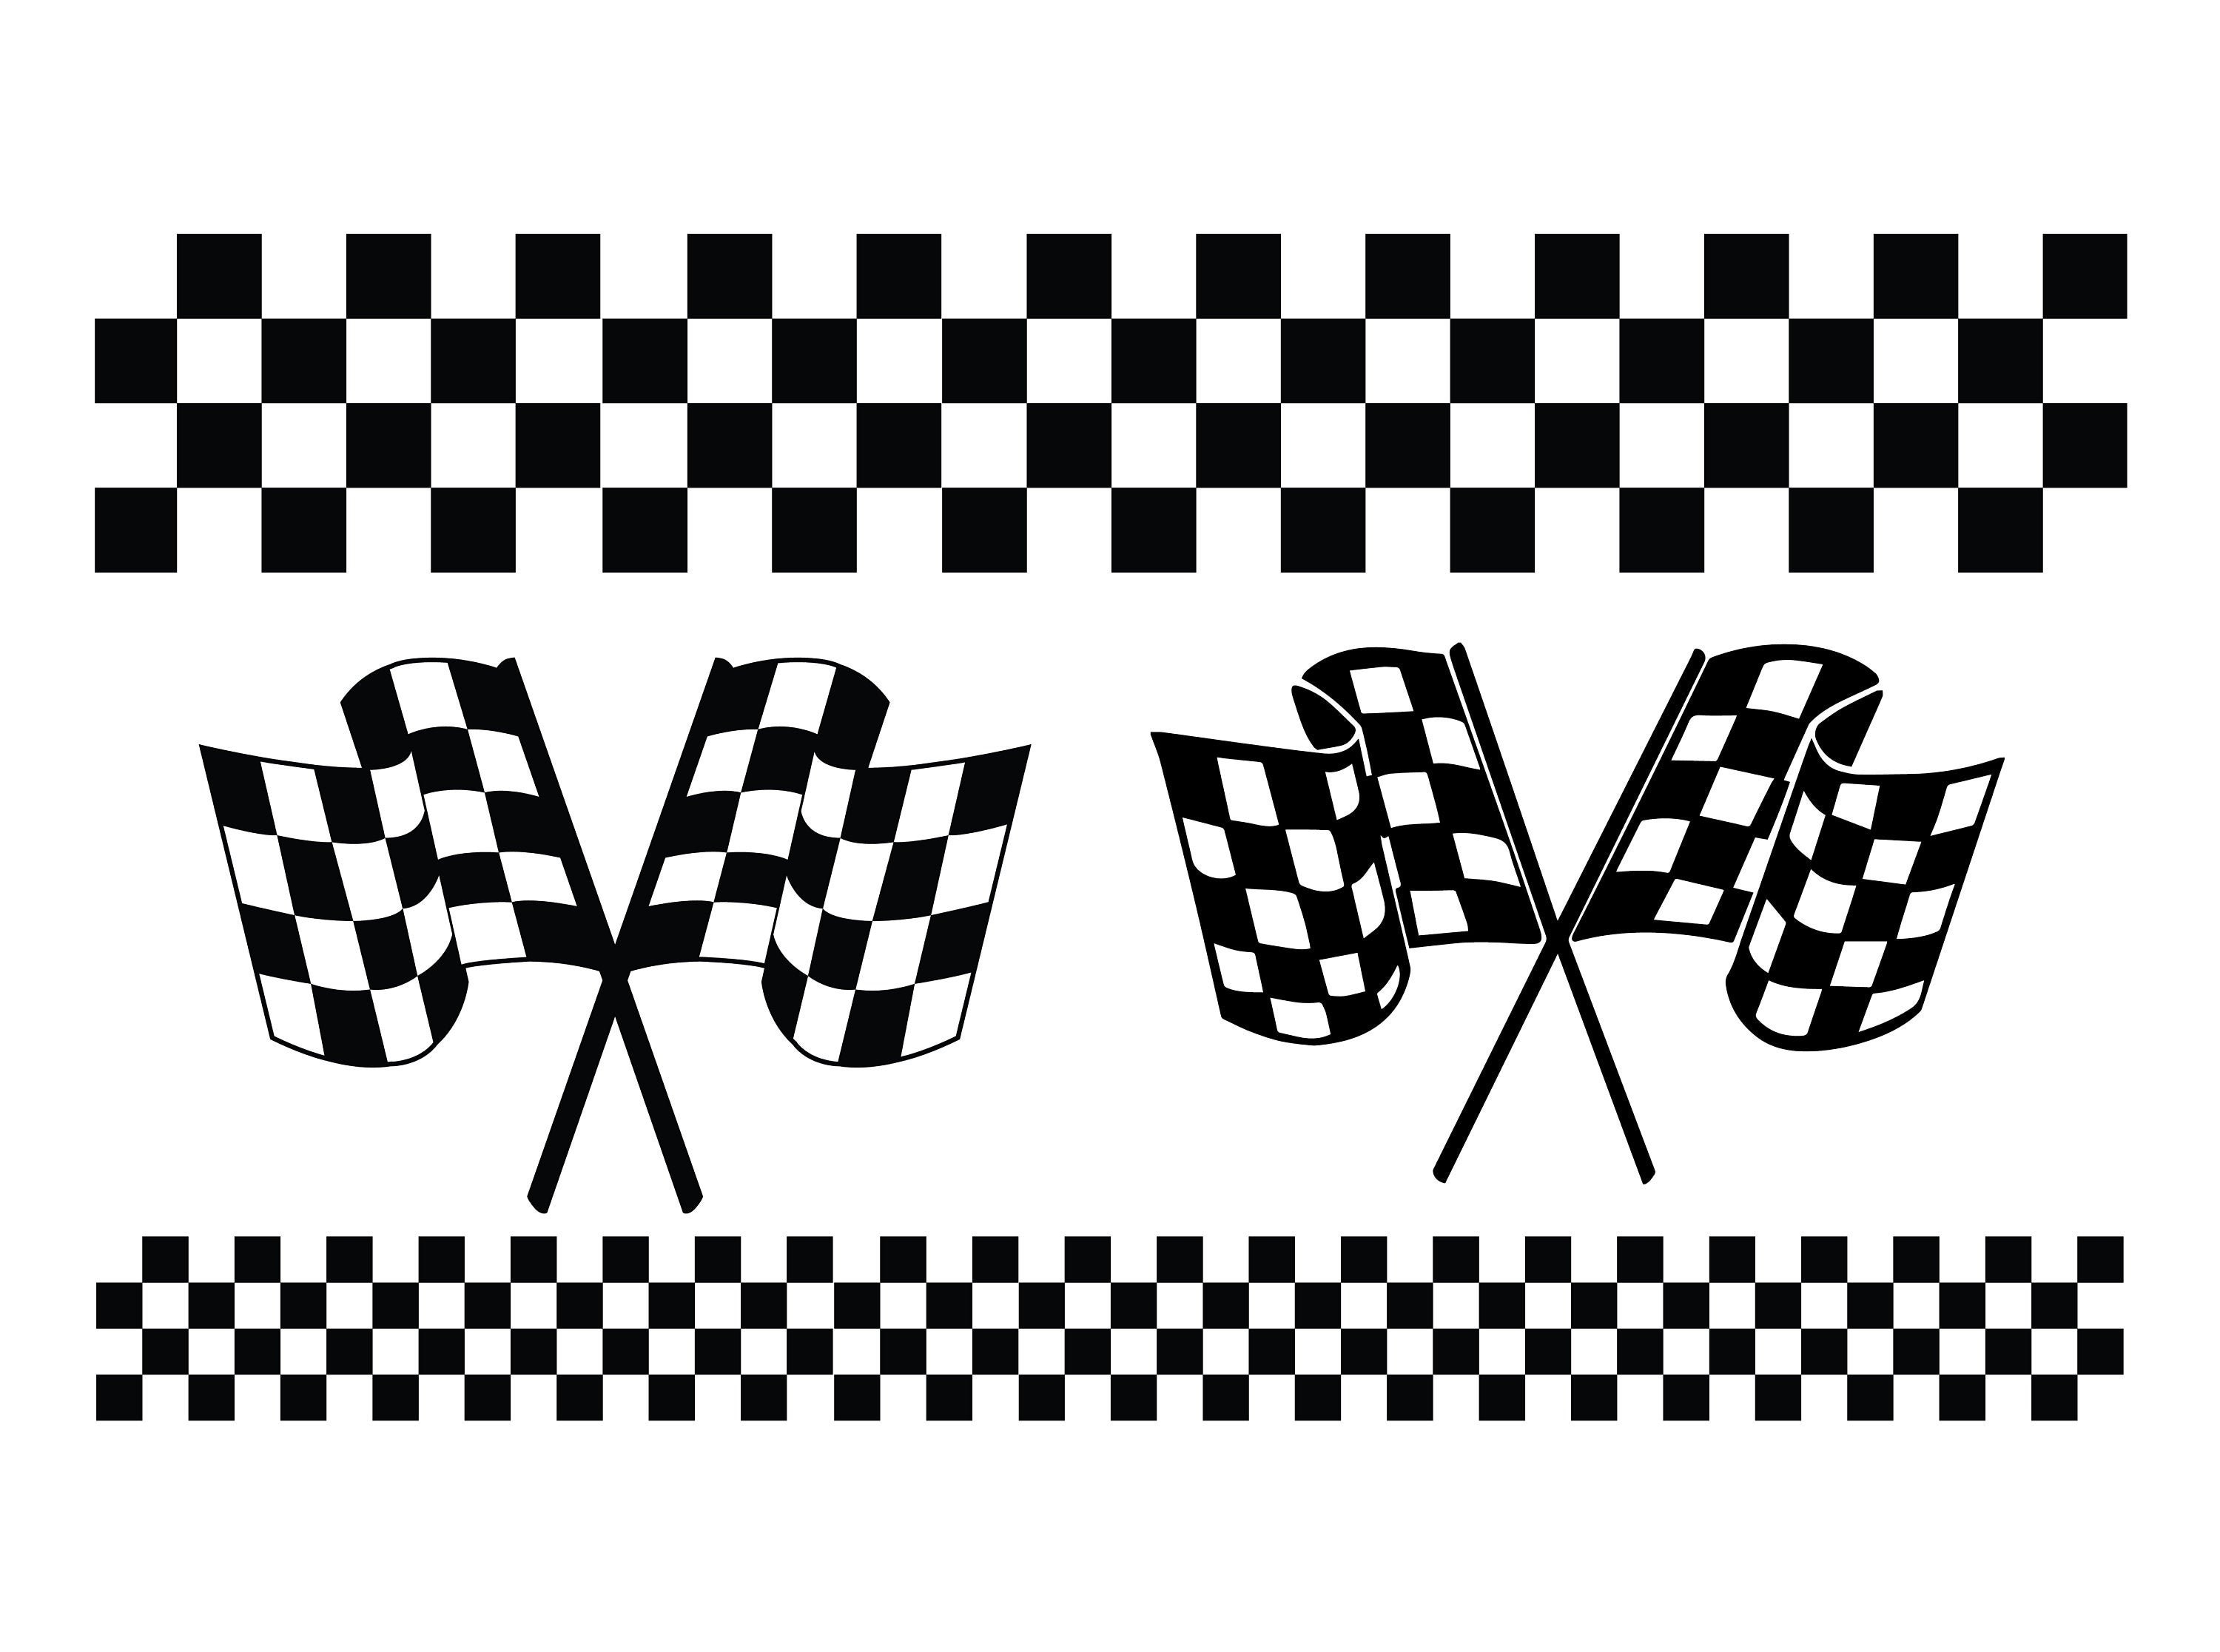 RACING STRIPES Svg Checkered FLAGS Svg Racing Stripes Svg - Etsy